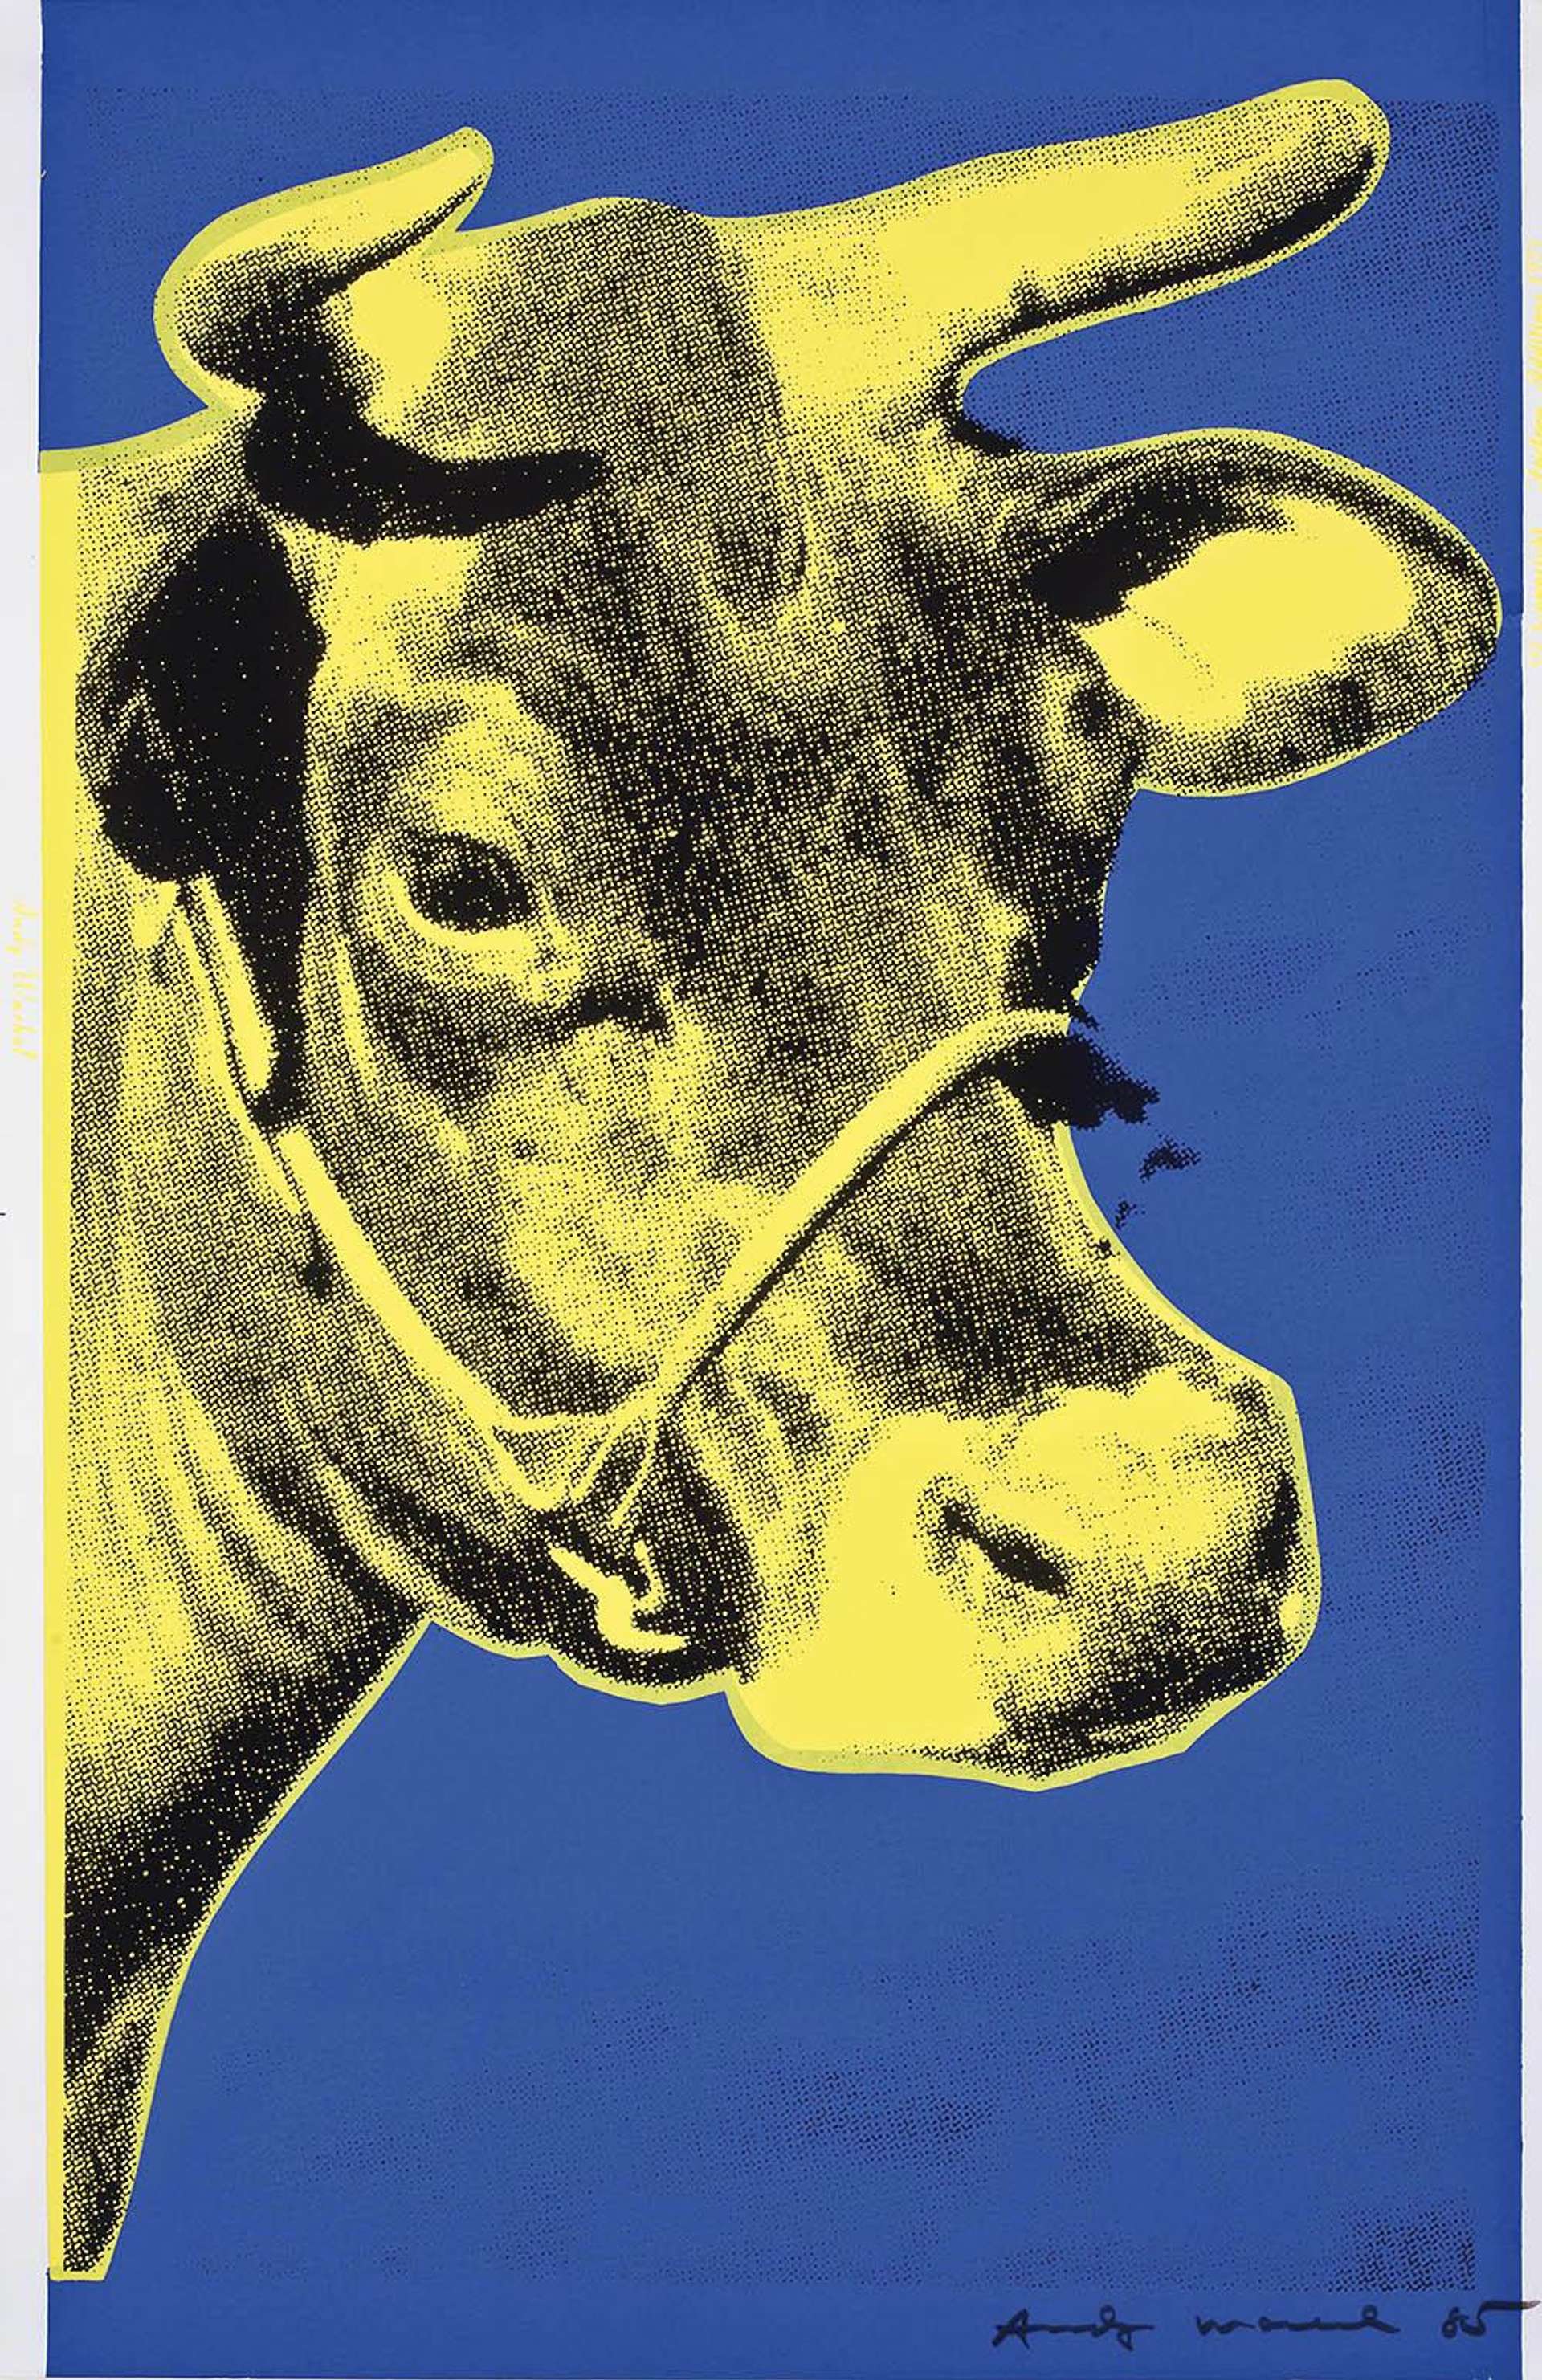 Cow (F. & S. II. 12) by Andy Warhol